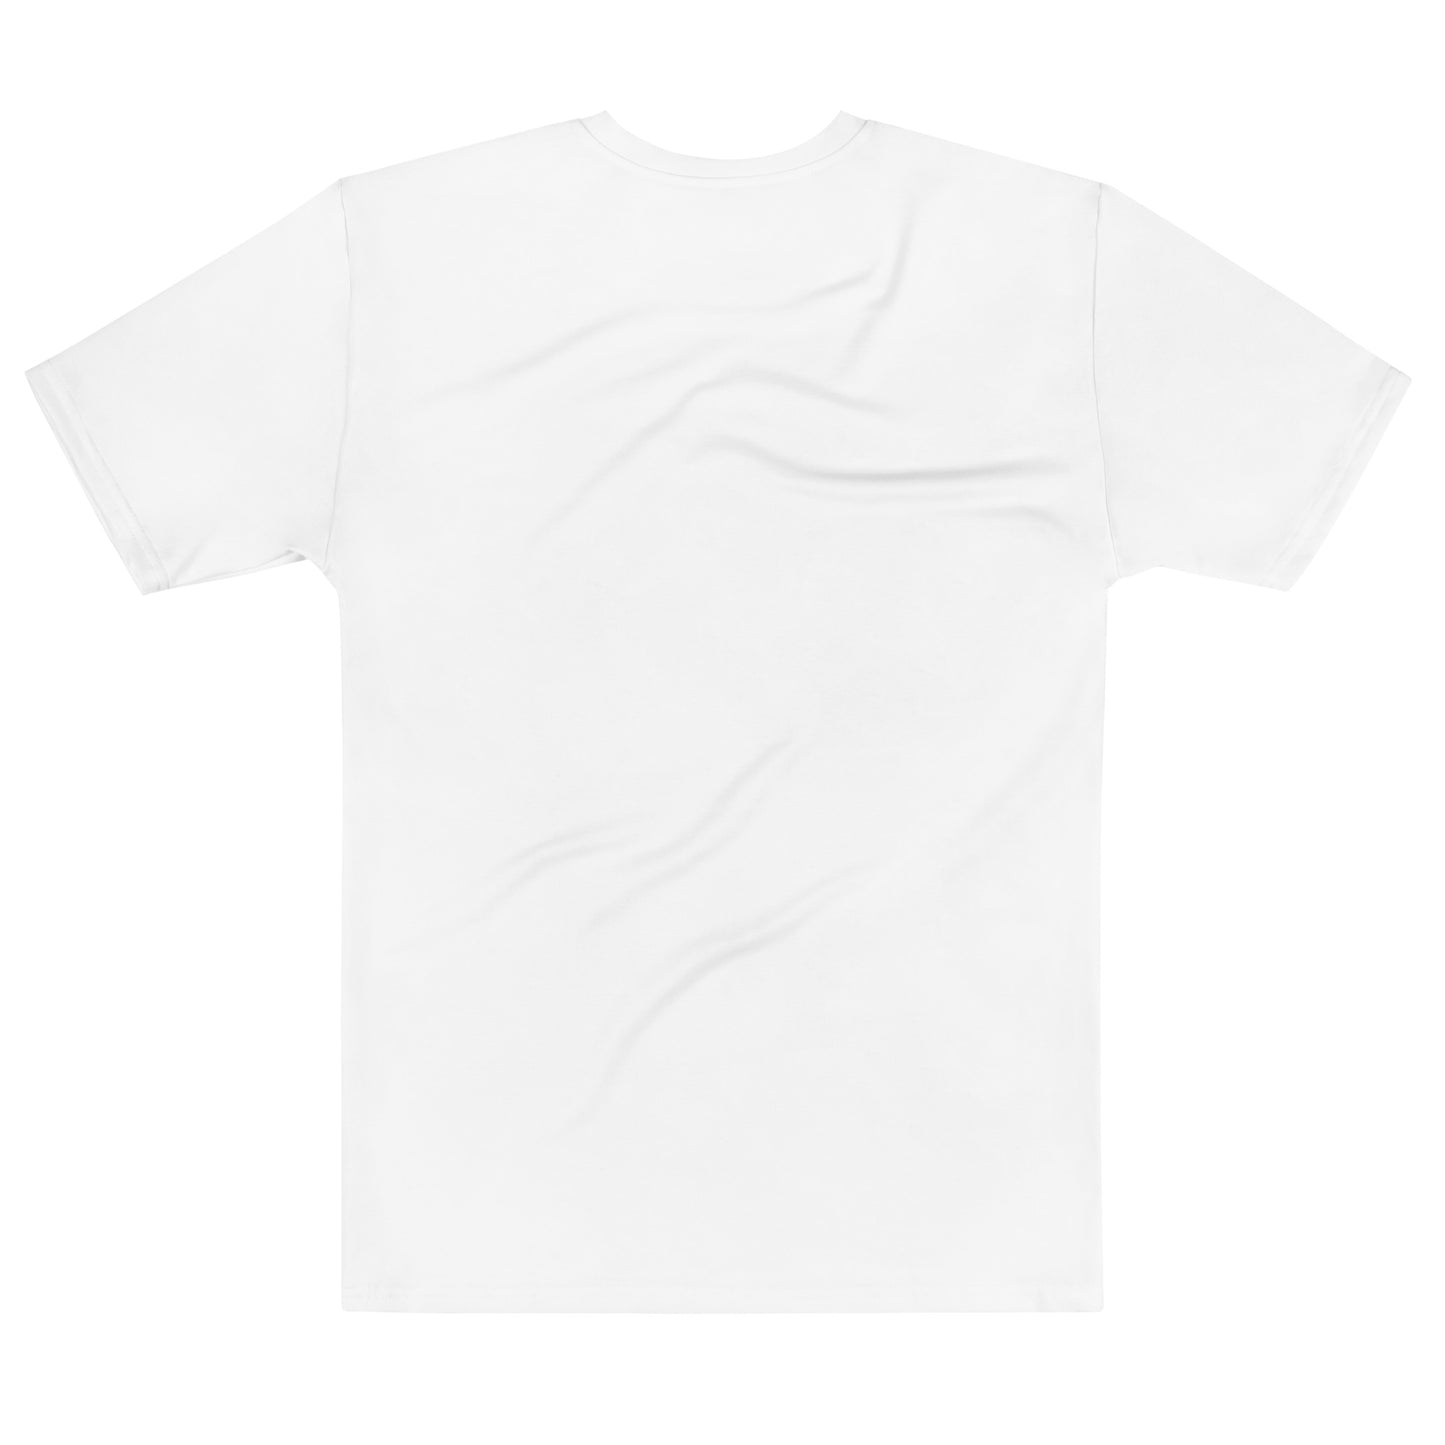 That's Grouse - Sustainably Made Men's Short Sleeve Tee